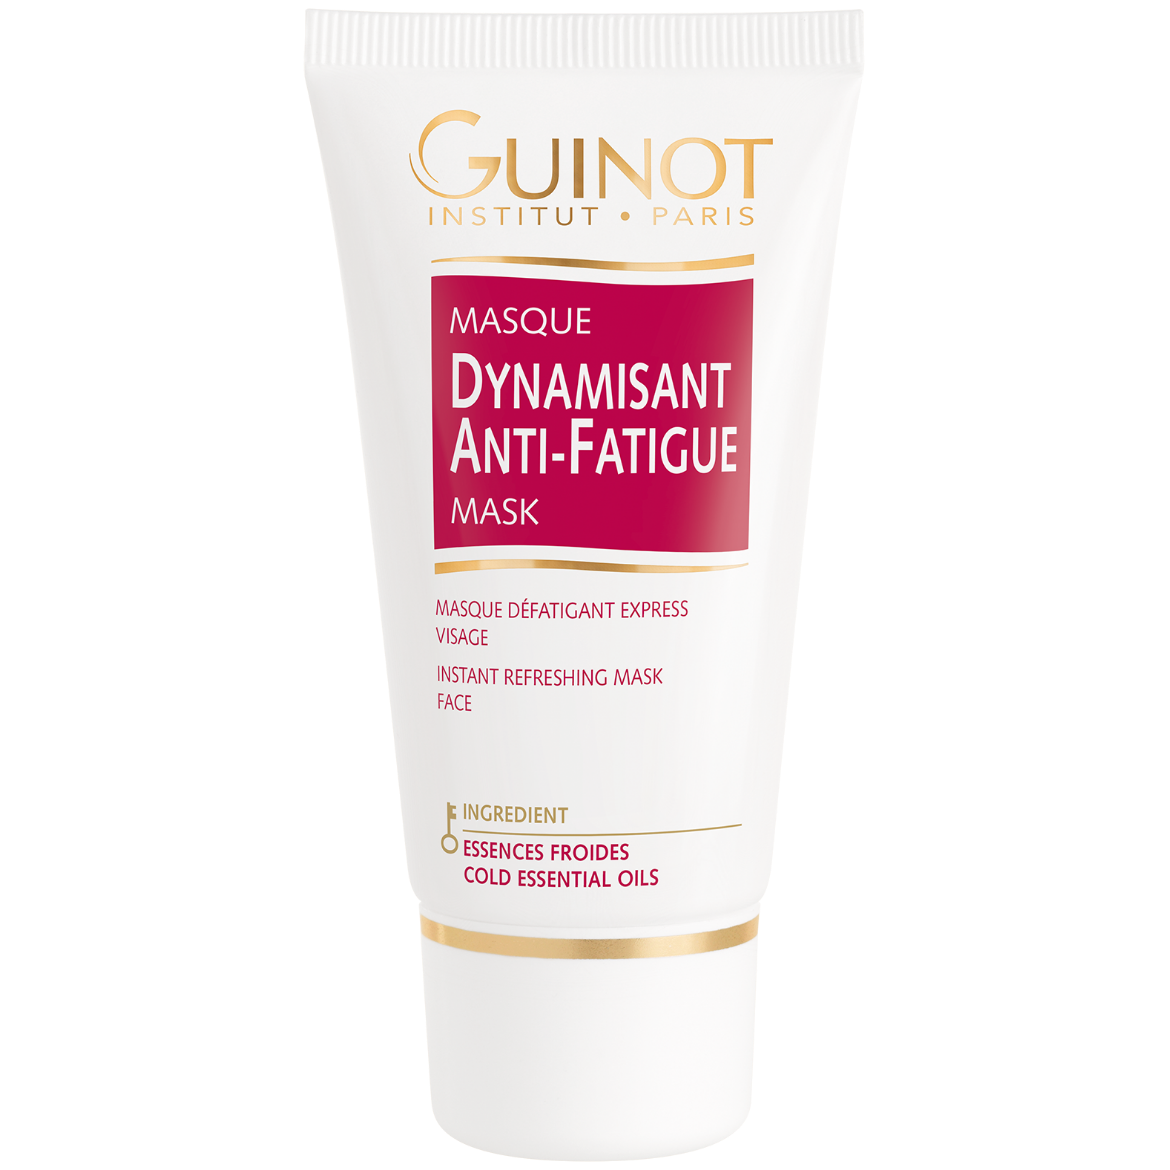 Image of Guinot Masque Dynamisant Anti-Fatigue (50ml)